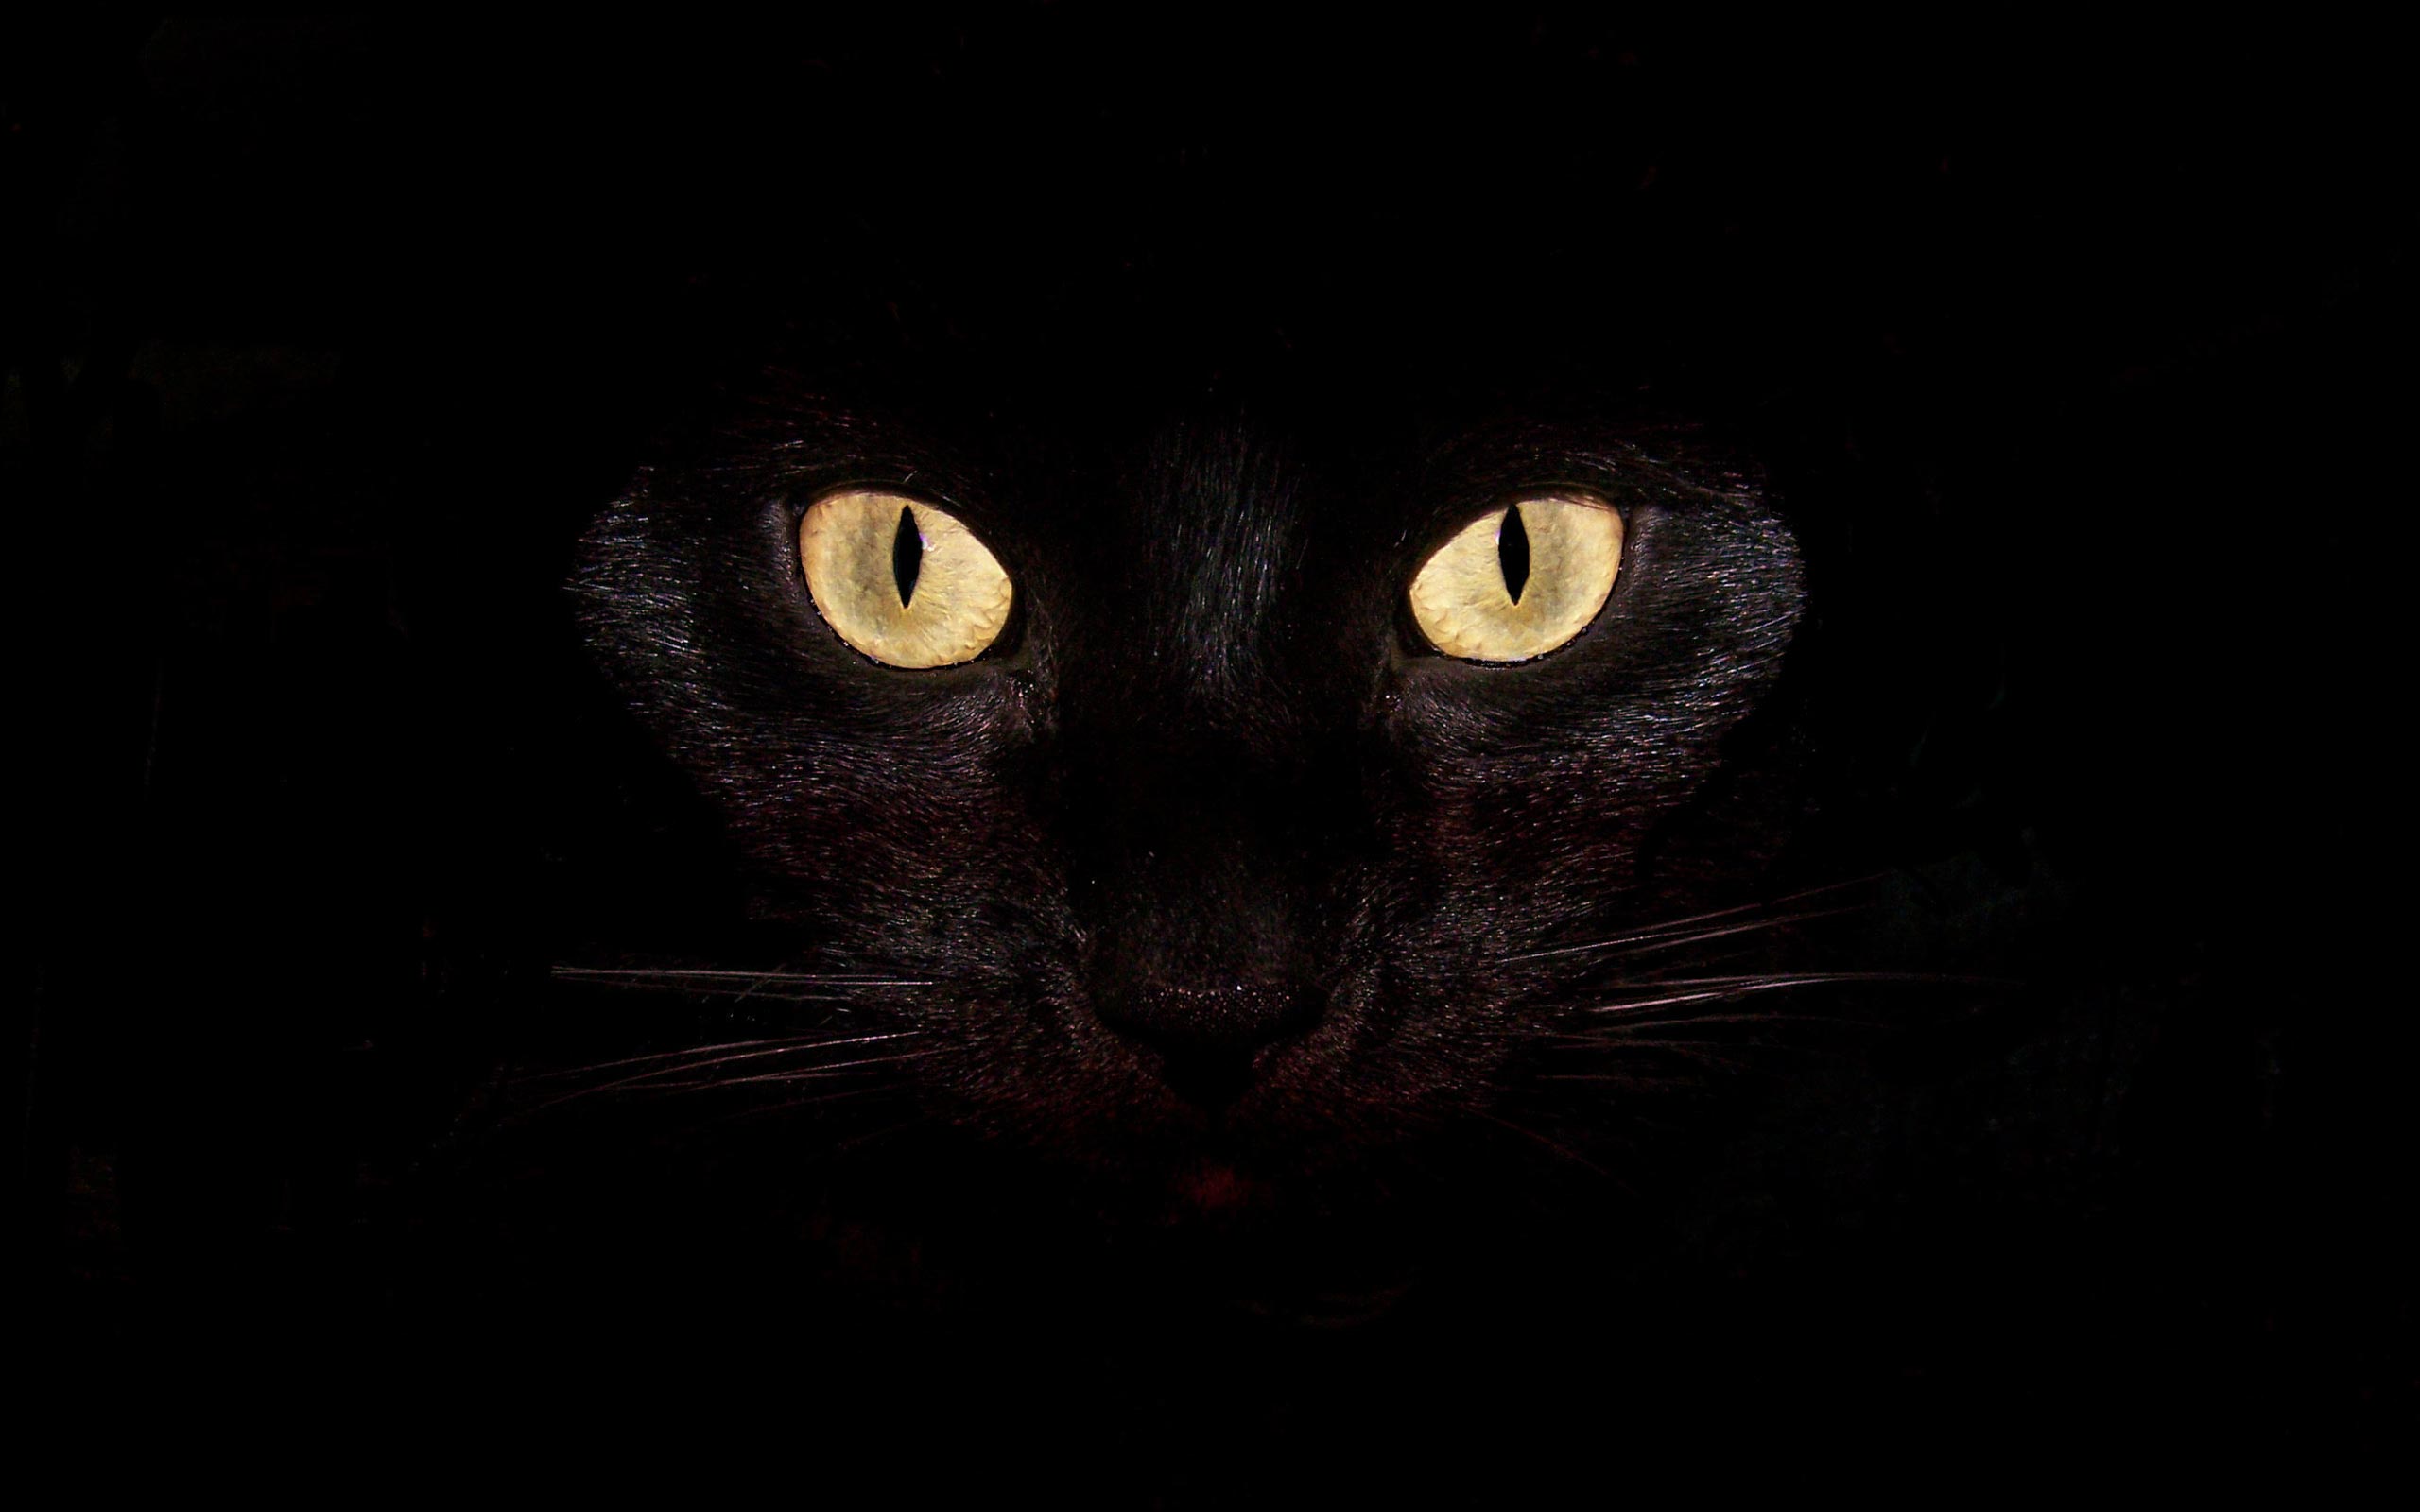 Abstract Black cat backgrounds Wallpaper High Quality